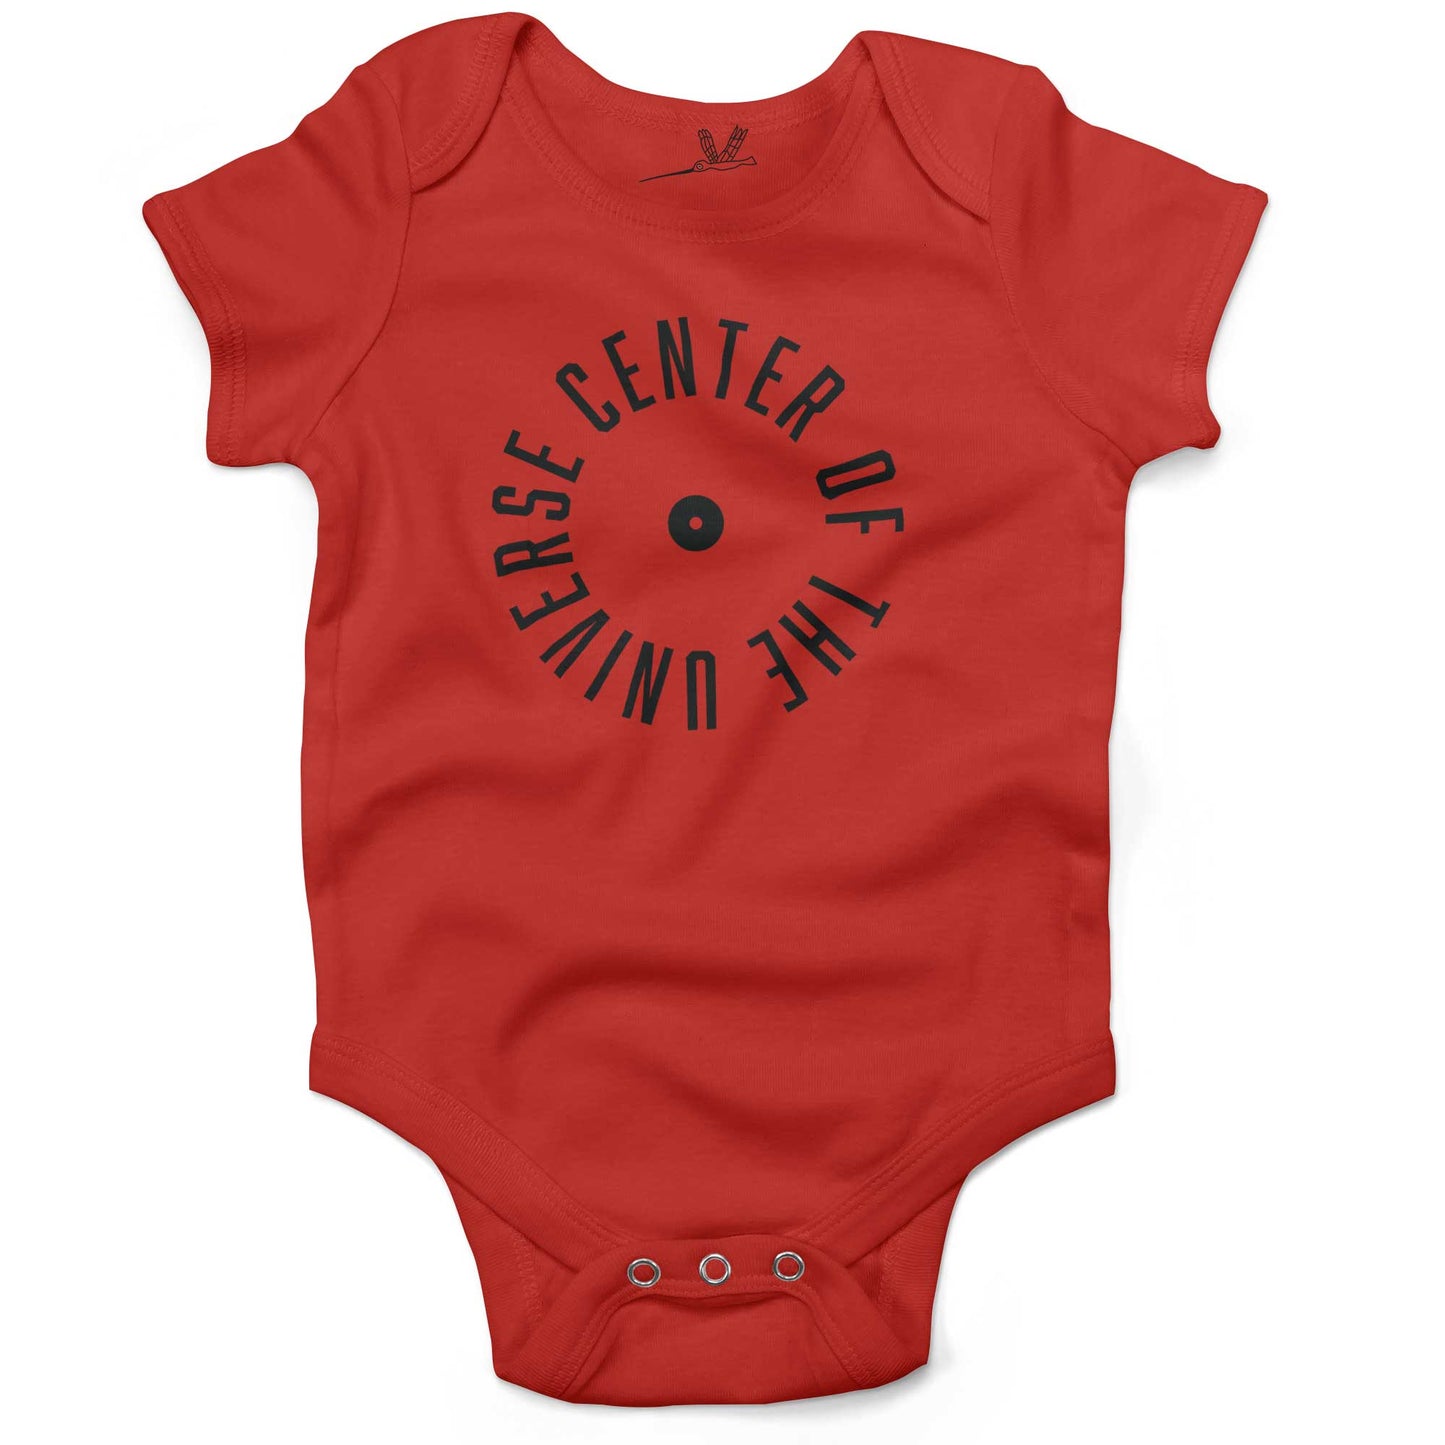 Center Of The Universe Baby One Piece or Raglan Tee-Organic Red-3-6 months